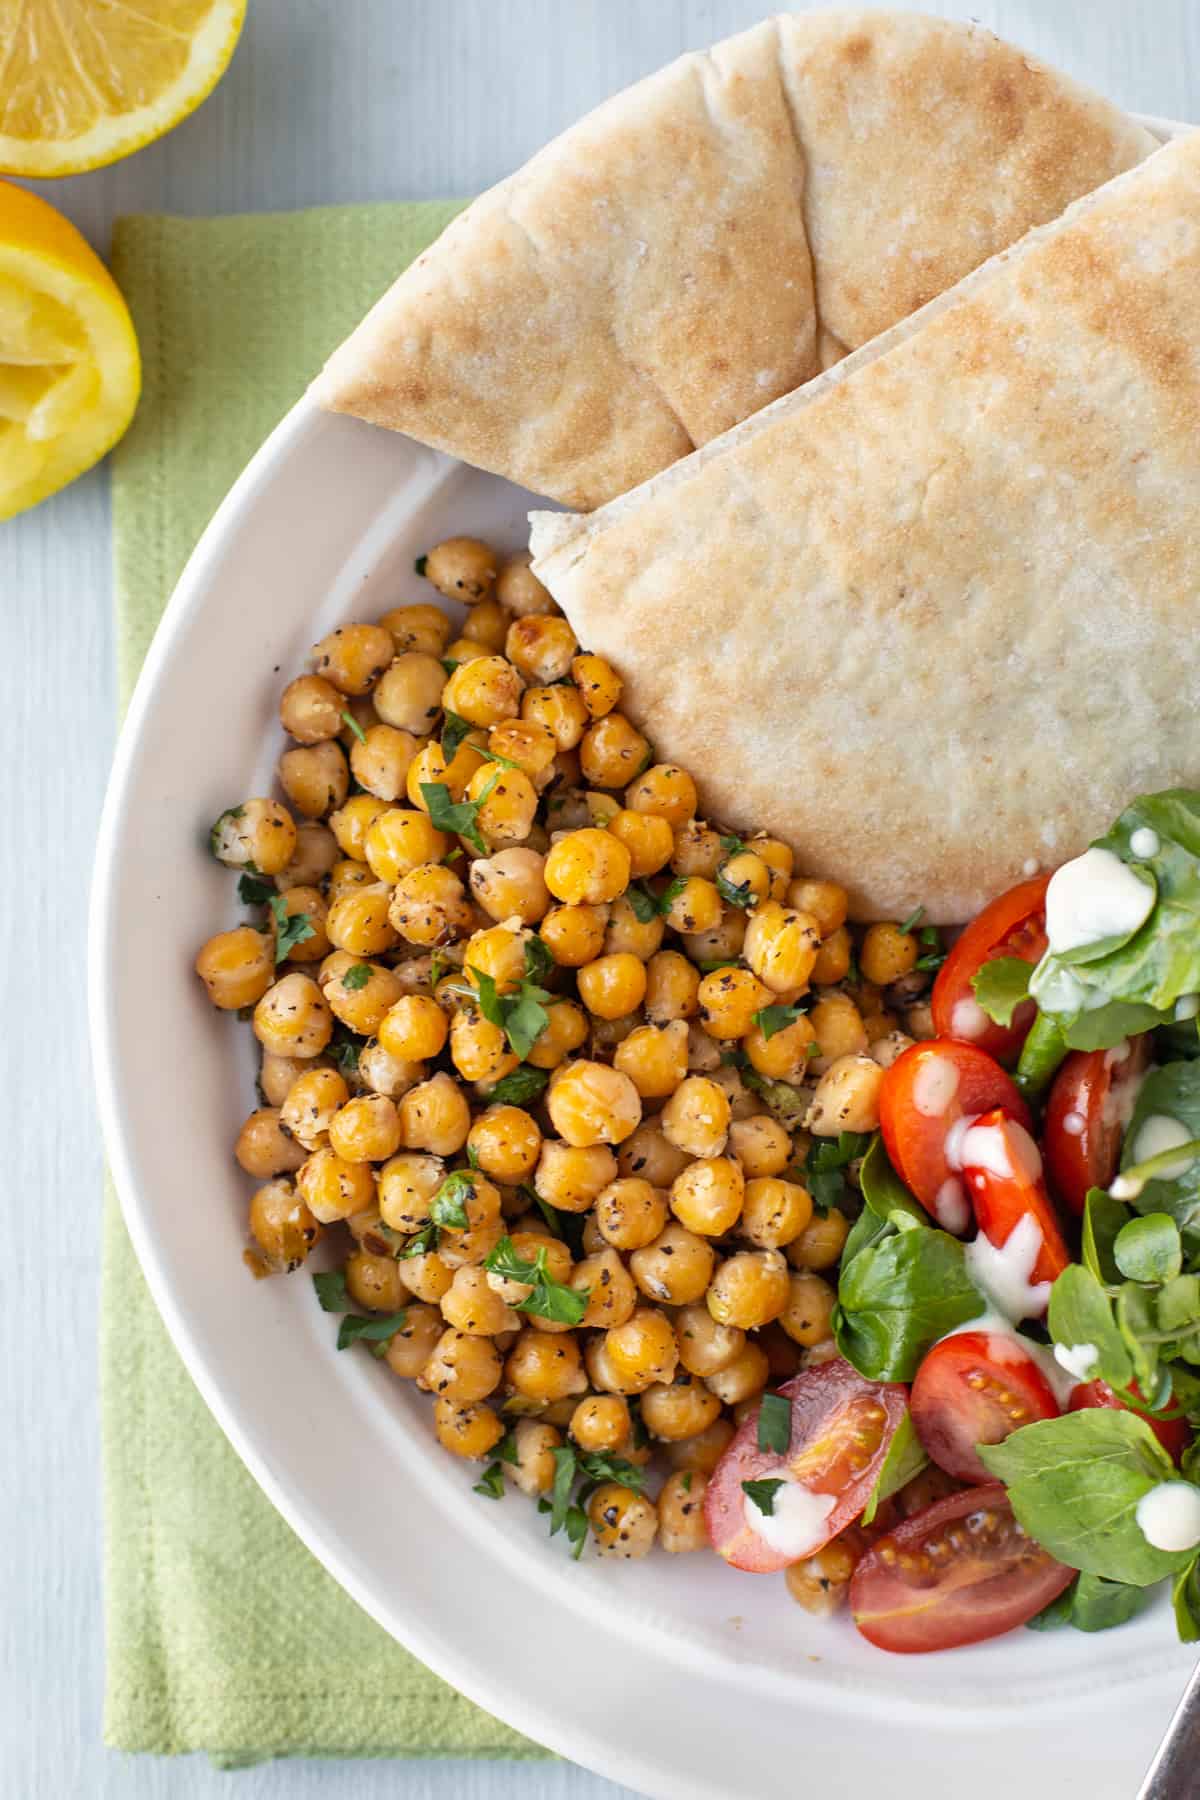 Lemon and black pepper chickpeas in a bowl with pitta bread, tomatoes and watercress.